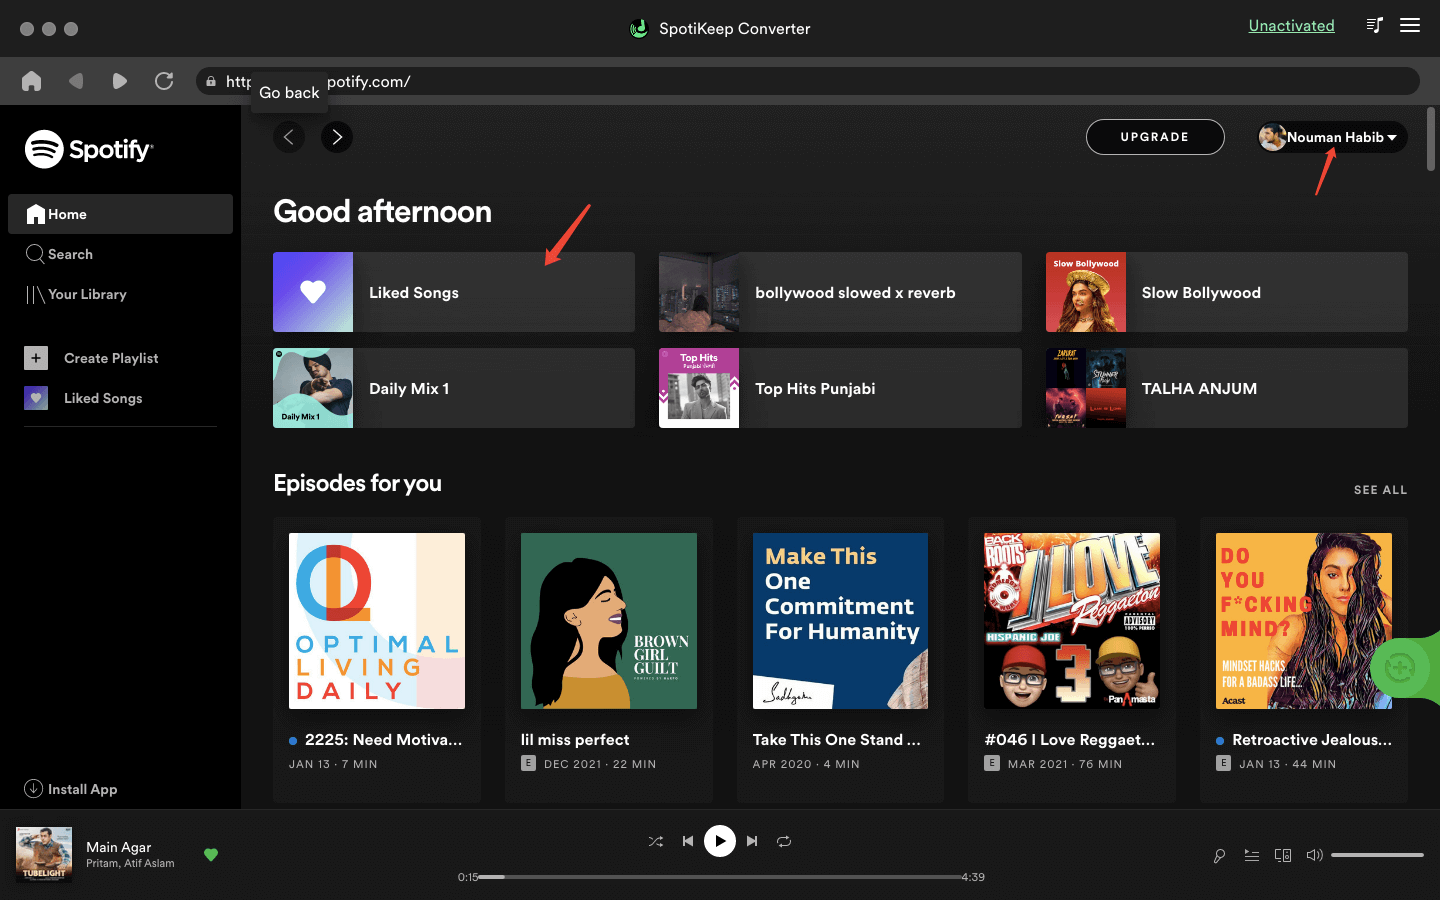 best spotify music converter for mac